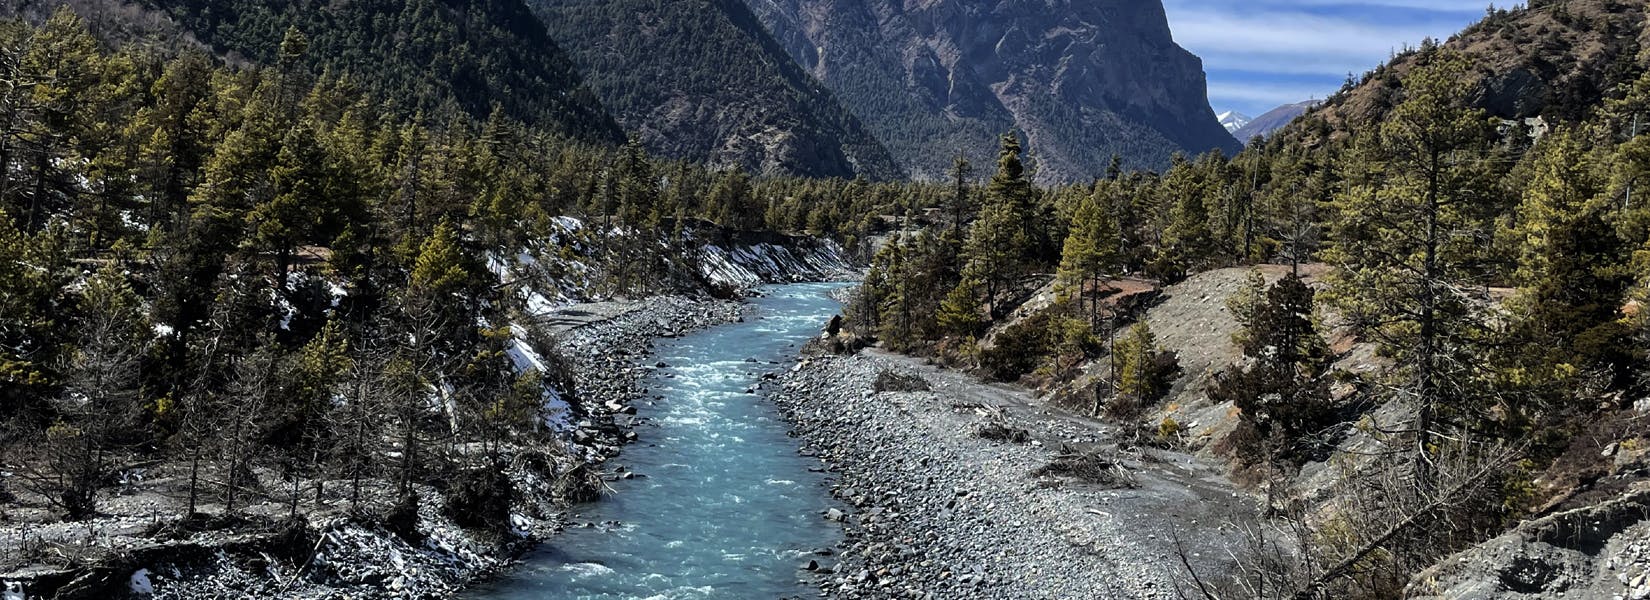 Things to See and Do in Manang